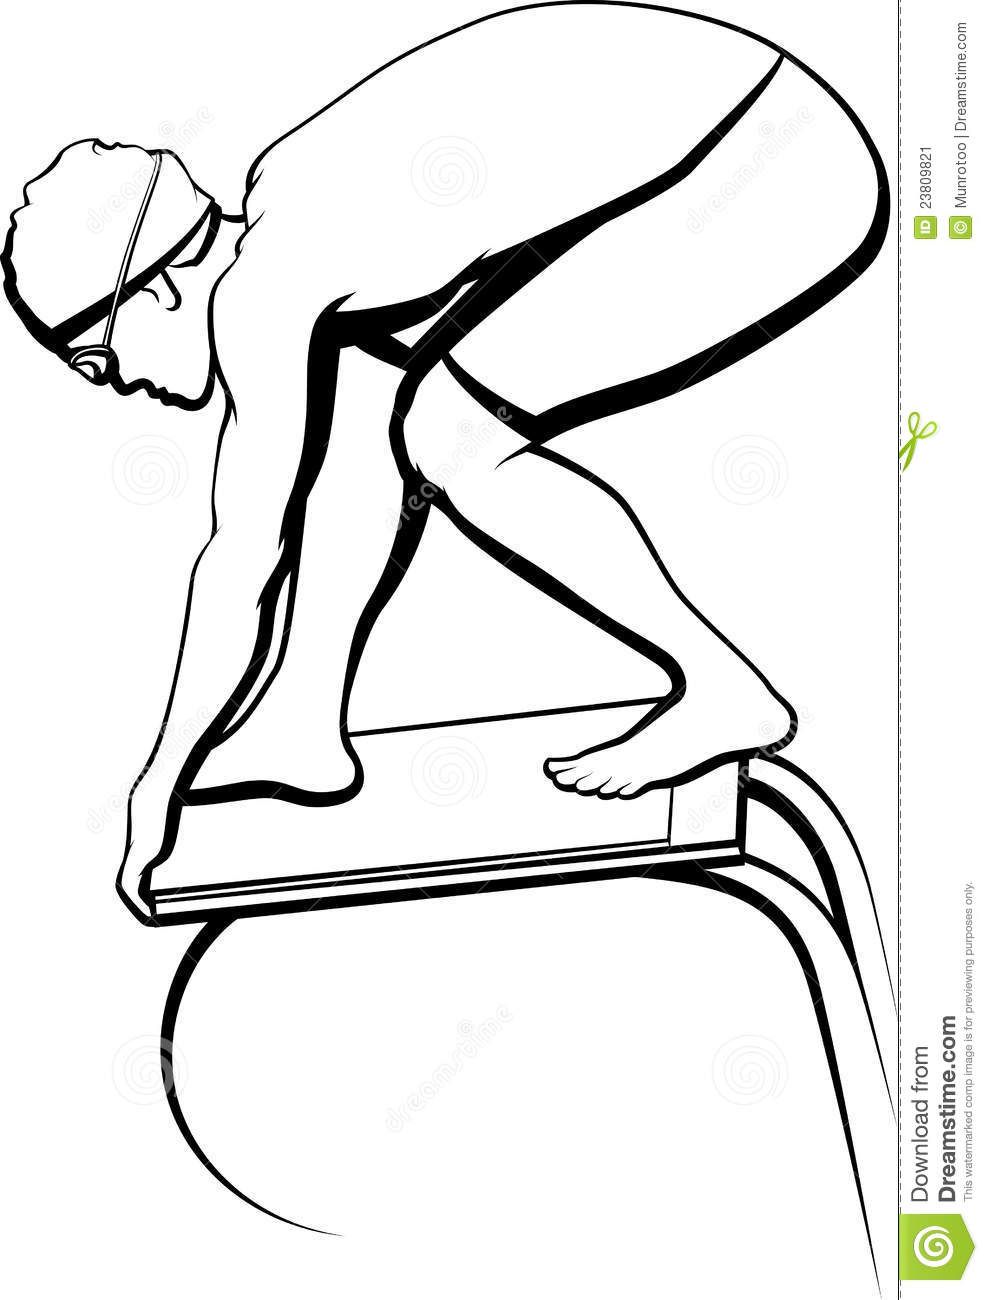 Swimmer clipart olympic diver. Swimming black and white